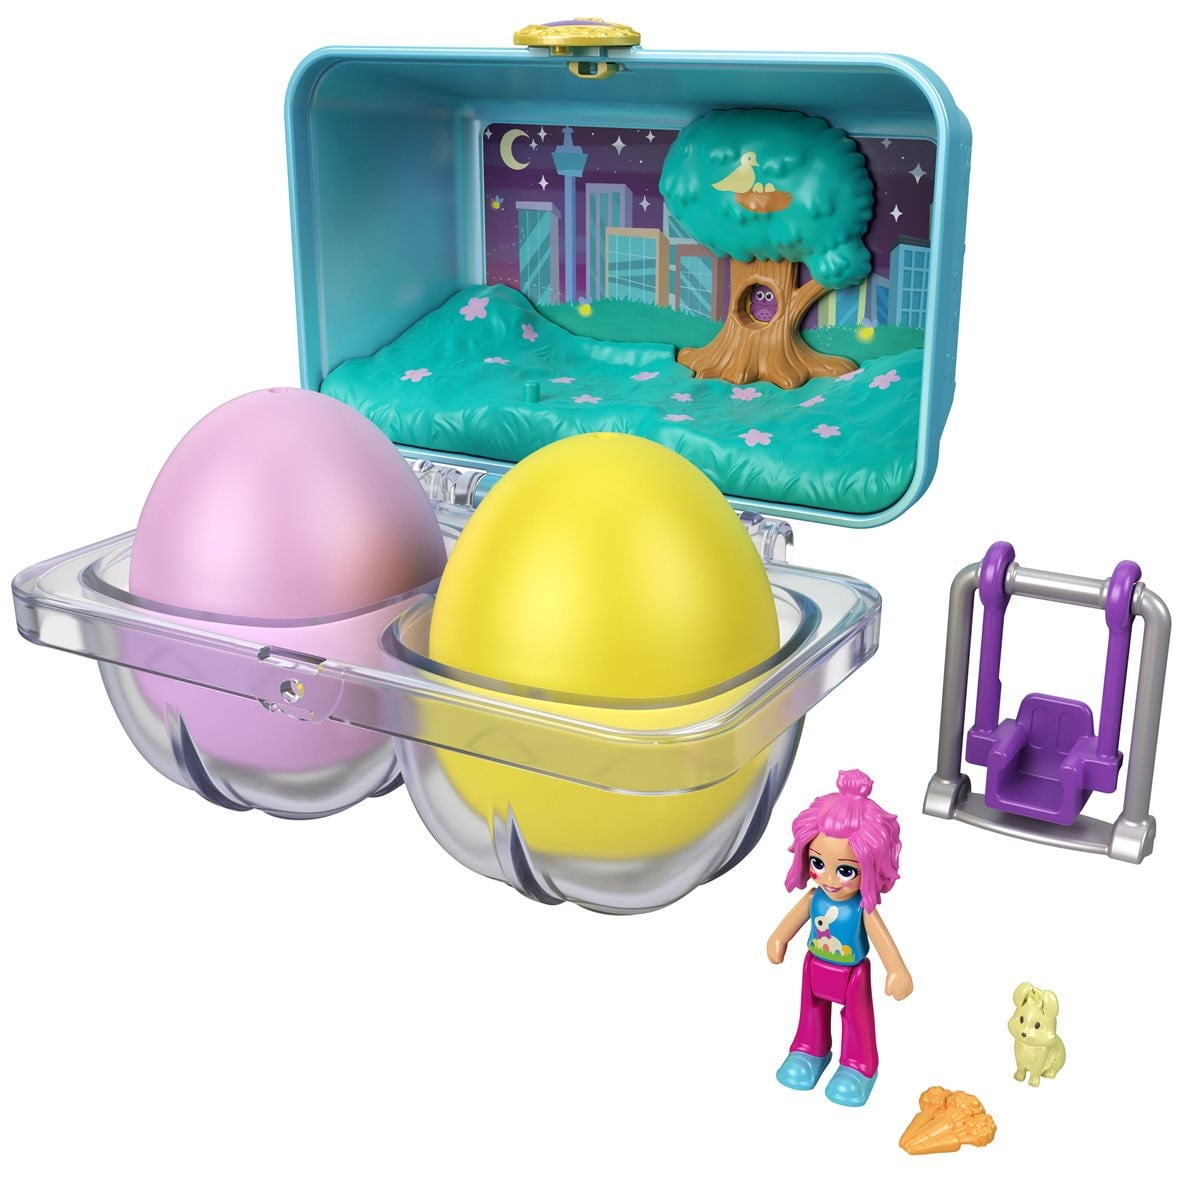 New Polly Pocket Easter Egg  Easter 2020 1 dolly and 1 outfit 